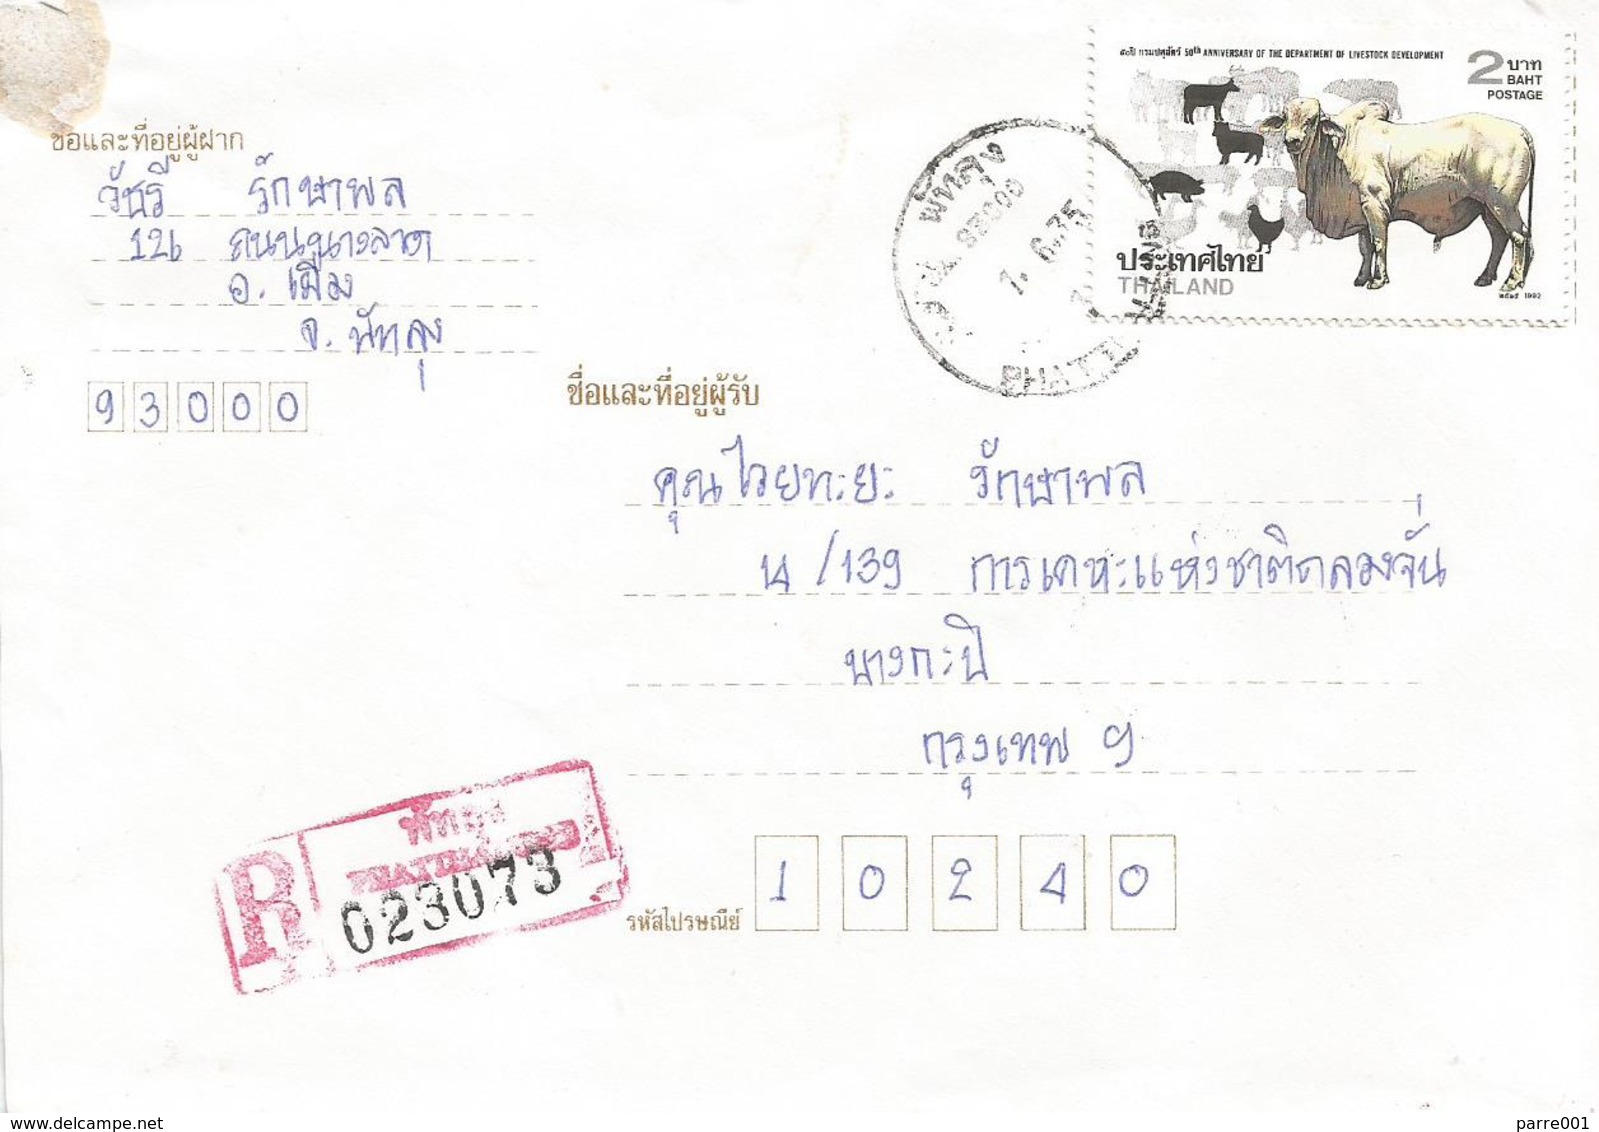 Thailand 1992 Phatthalling Brahma Cow Domestic Registered Cover - Cows